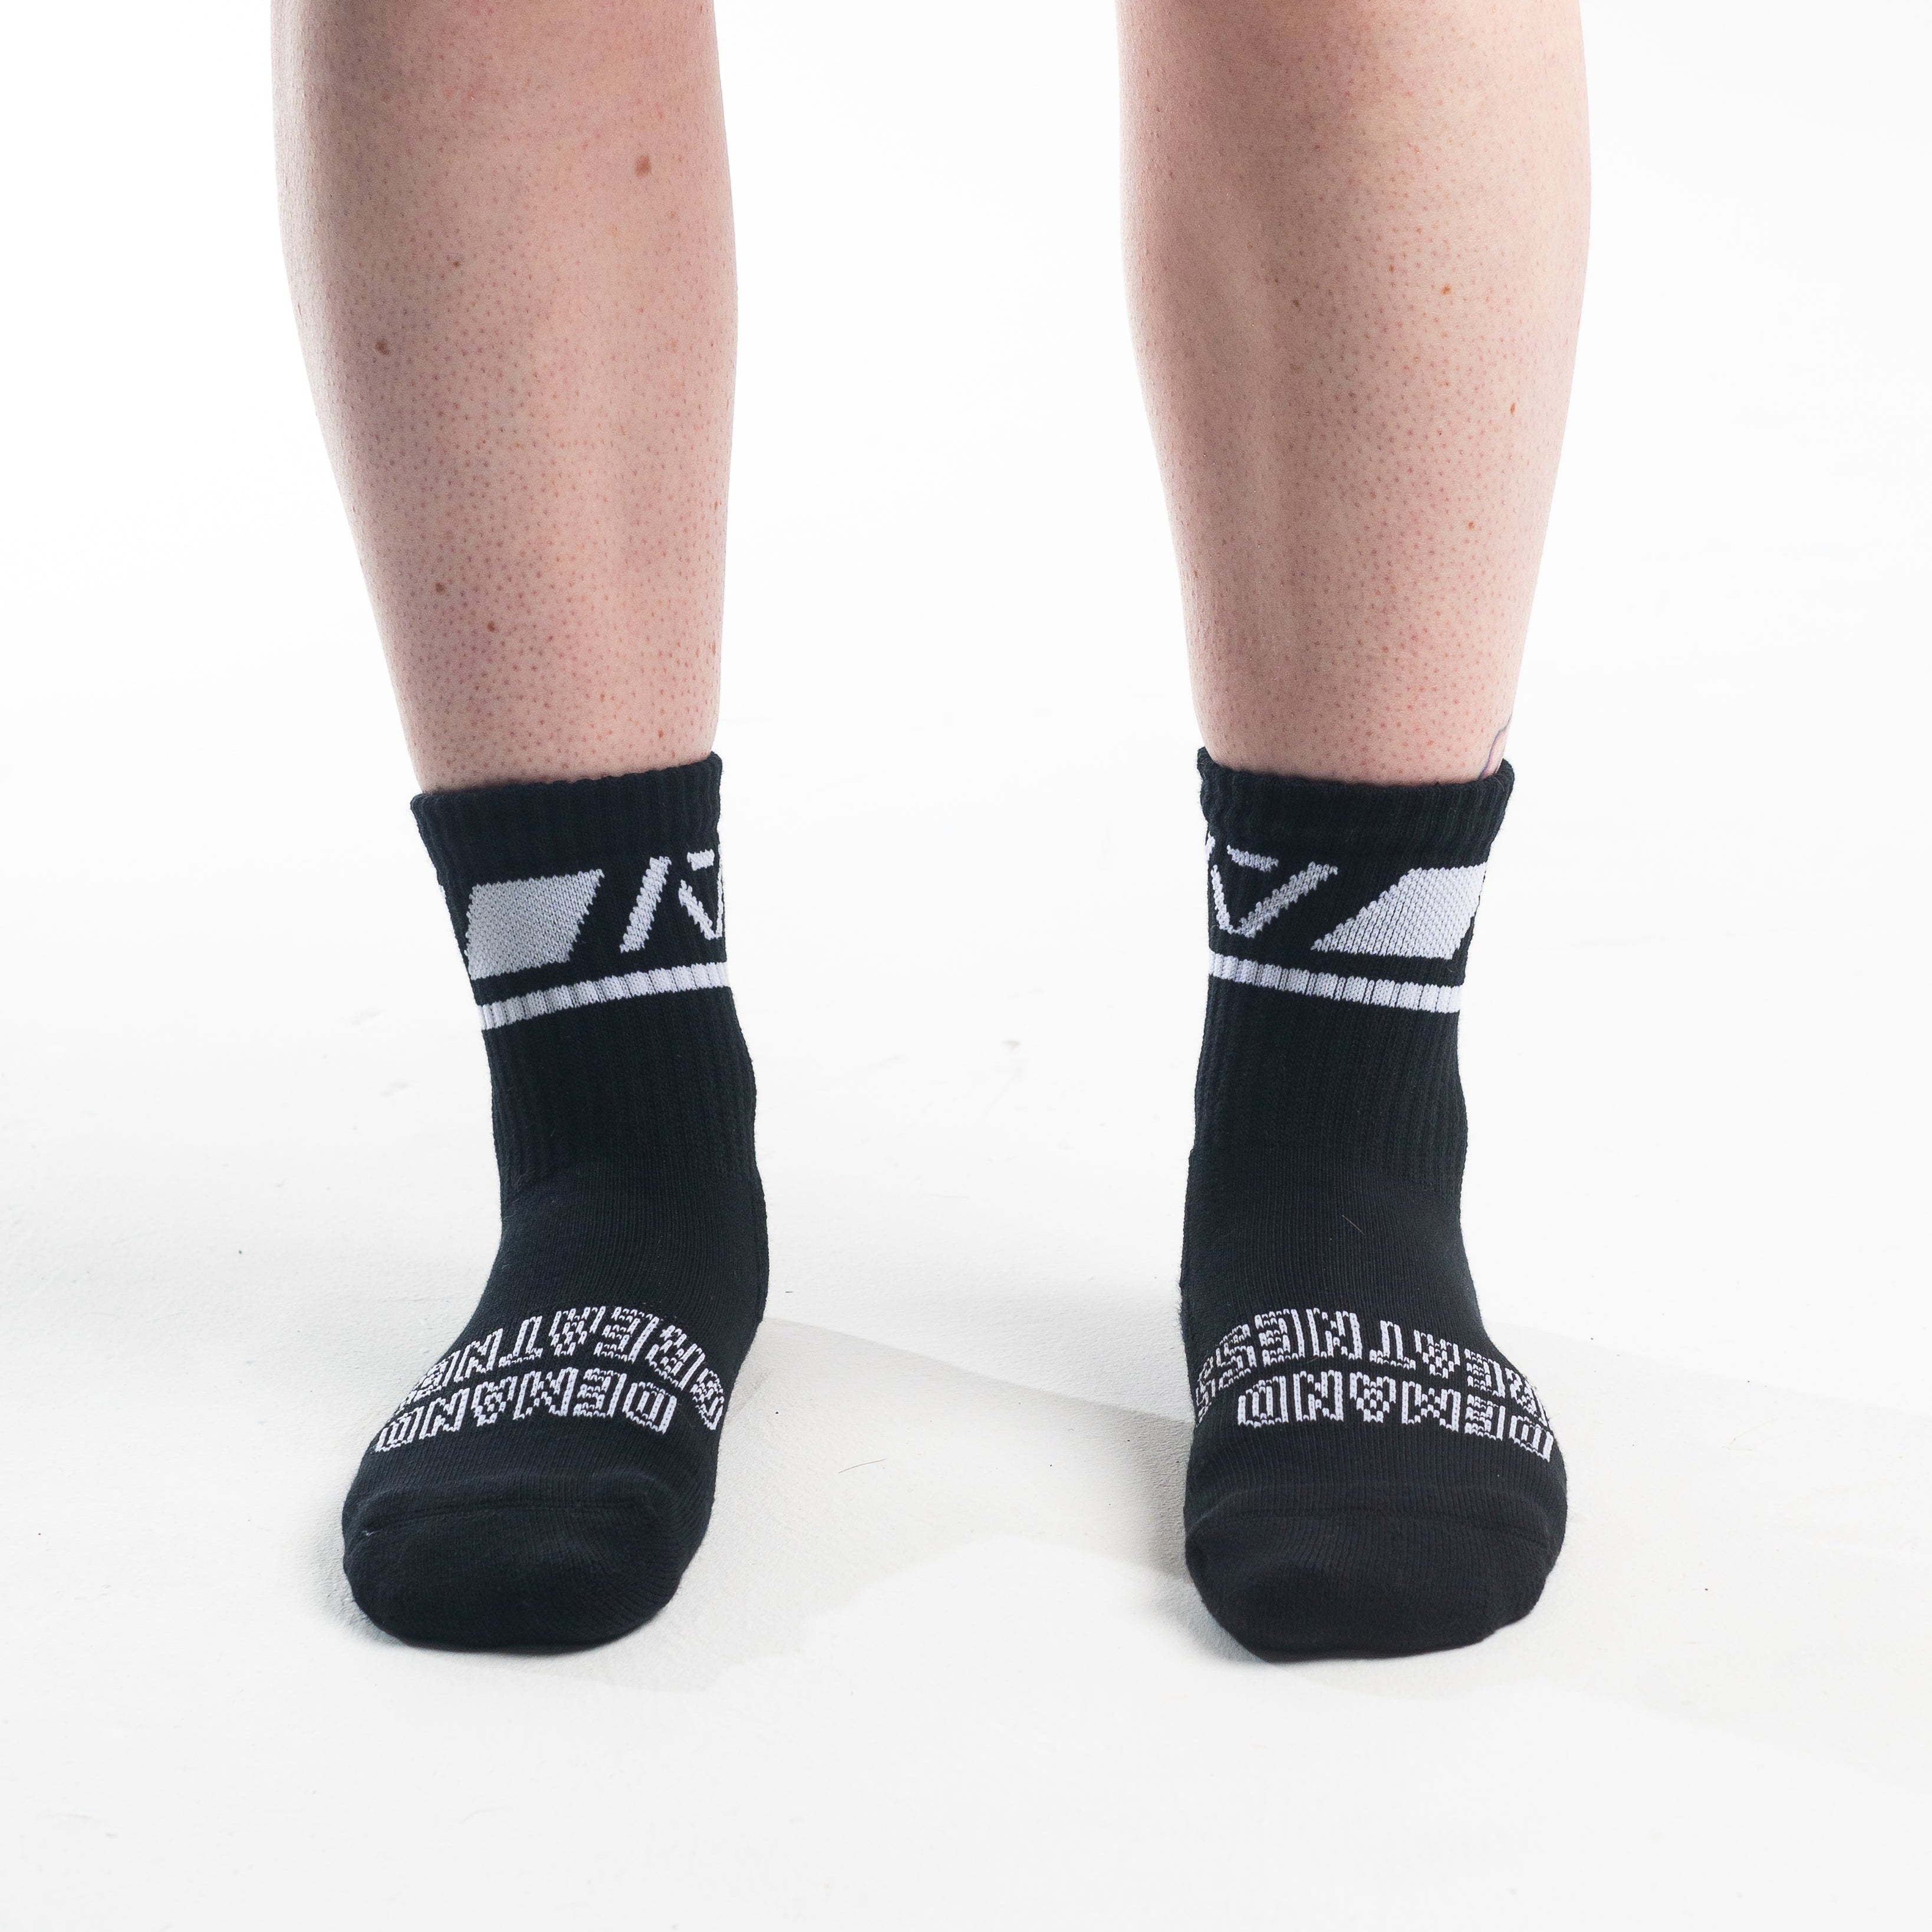 A7 Domino Crew socks showcase gold logos and let your energy show on the platform, in your training or while out and about. The IPF Approved Stealth Meet Kit includes Powerlifting Singlet, A7 Meet Shirt, A7 Zebra Wrist Wraps, A7 Deadlift Socks, Hourglass Knee Sleeves (Stiff Knee Sleeves and Rigor Mortis Knee Sleeves). All A7 Powerlifting Equipment shipping to UK, Norway, Switzerland and Iceland.